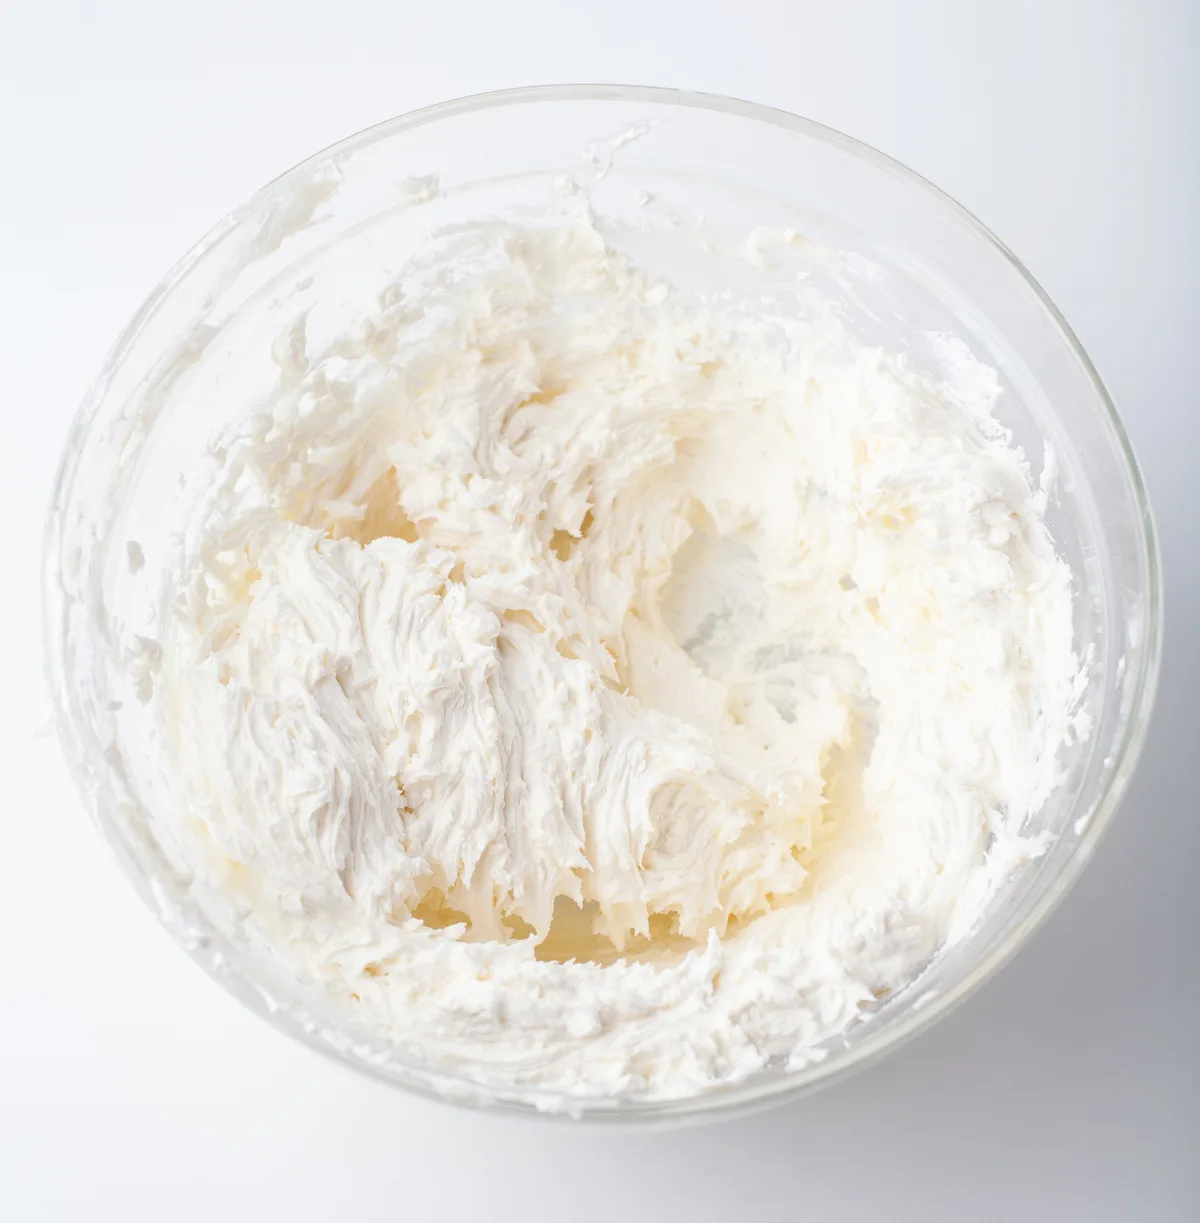 Buttercream frosting mixed in a clear glass bowl